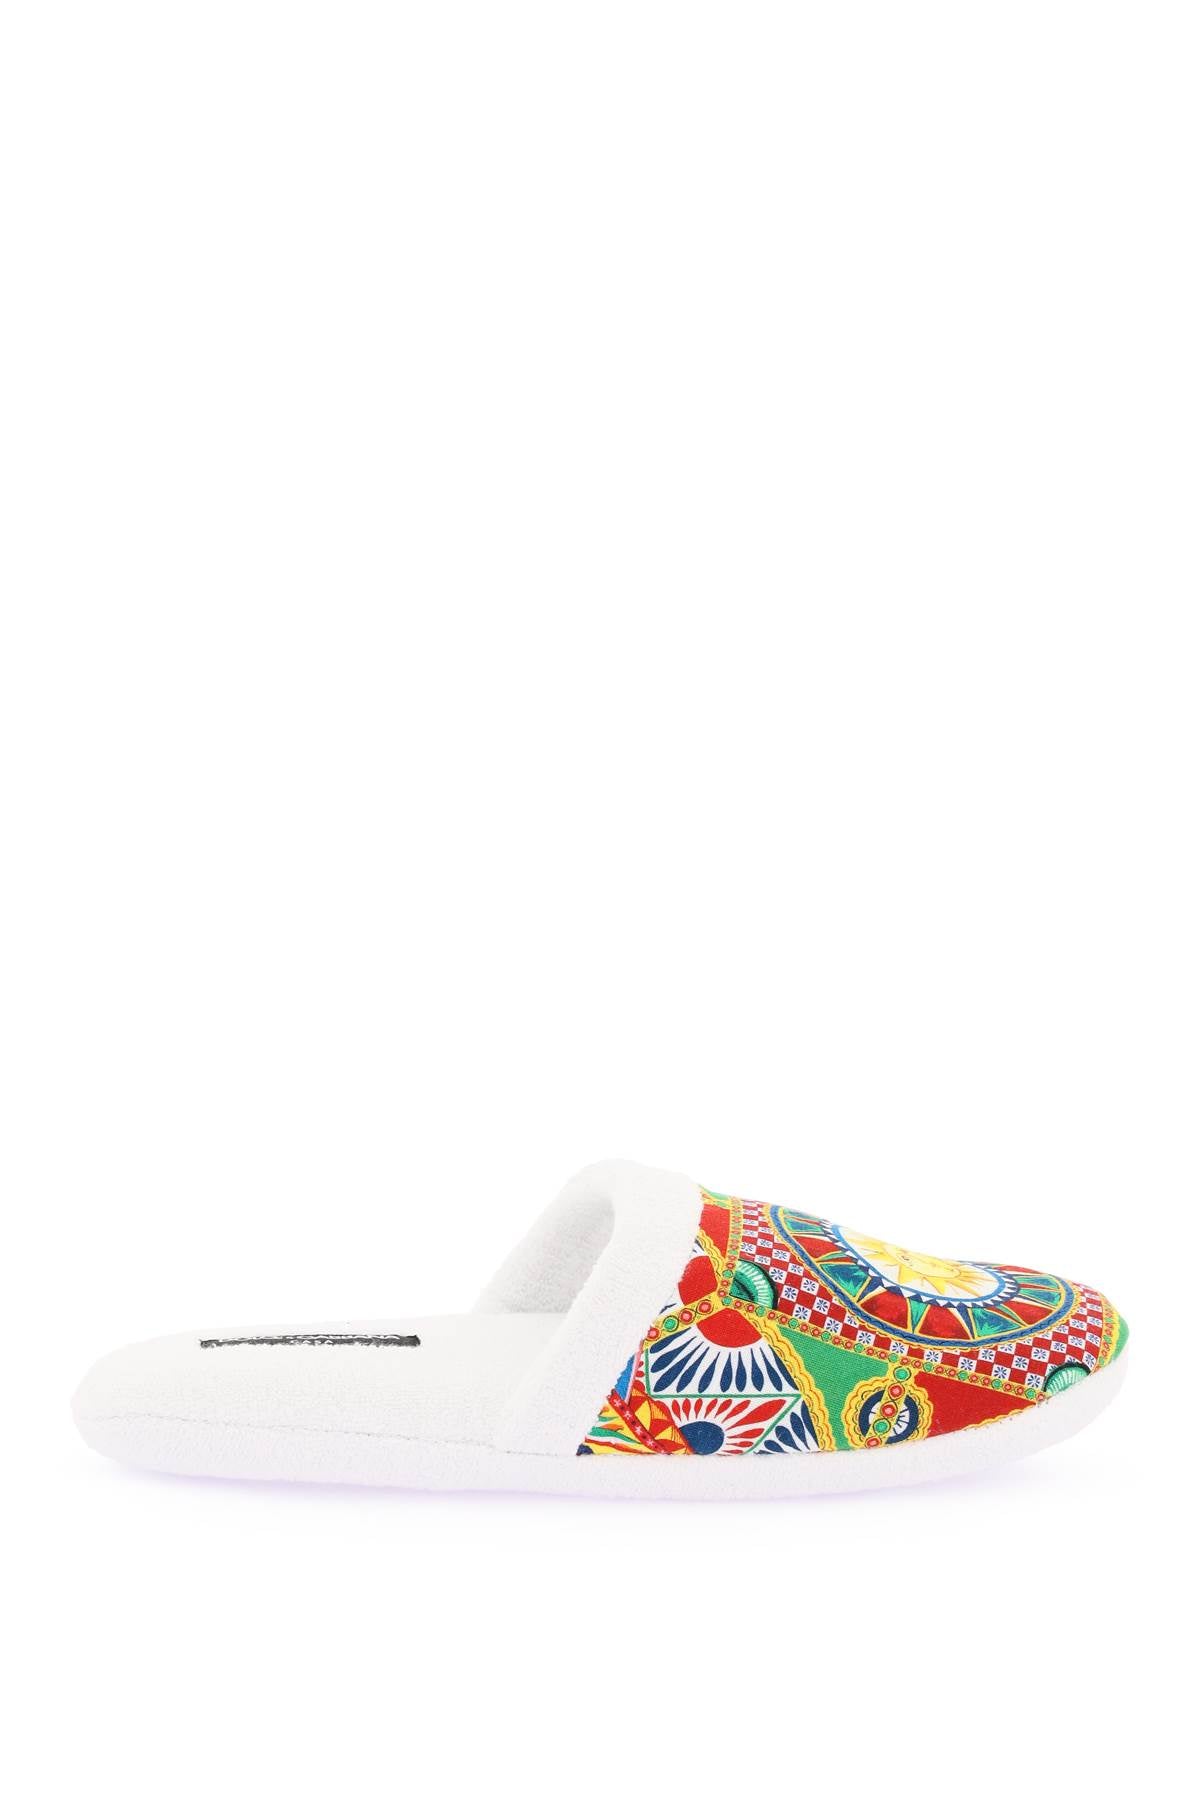 Dolce & gabbana 'carretto' terry slippers-0